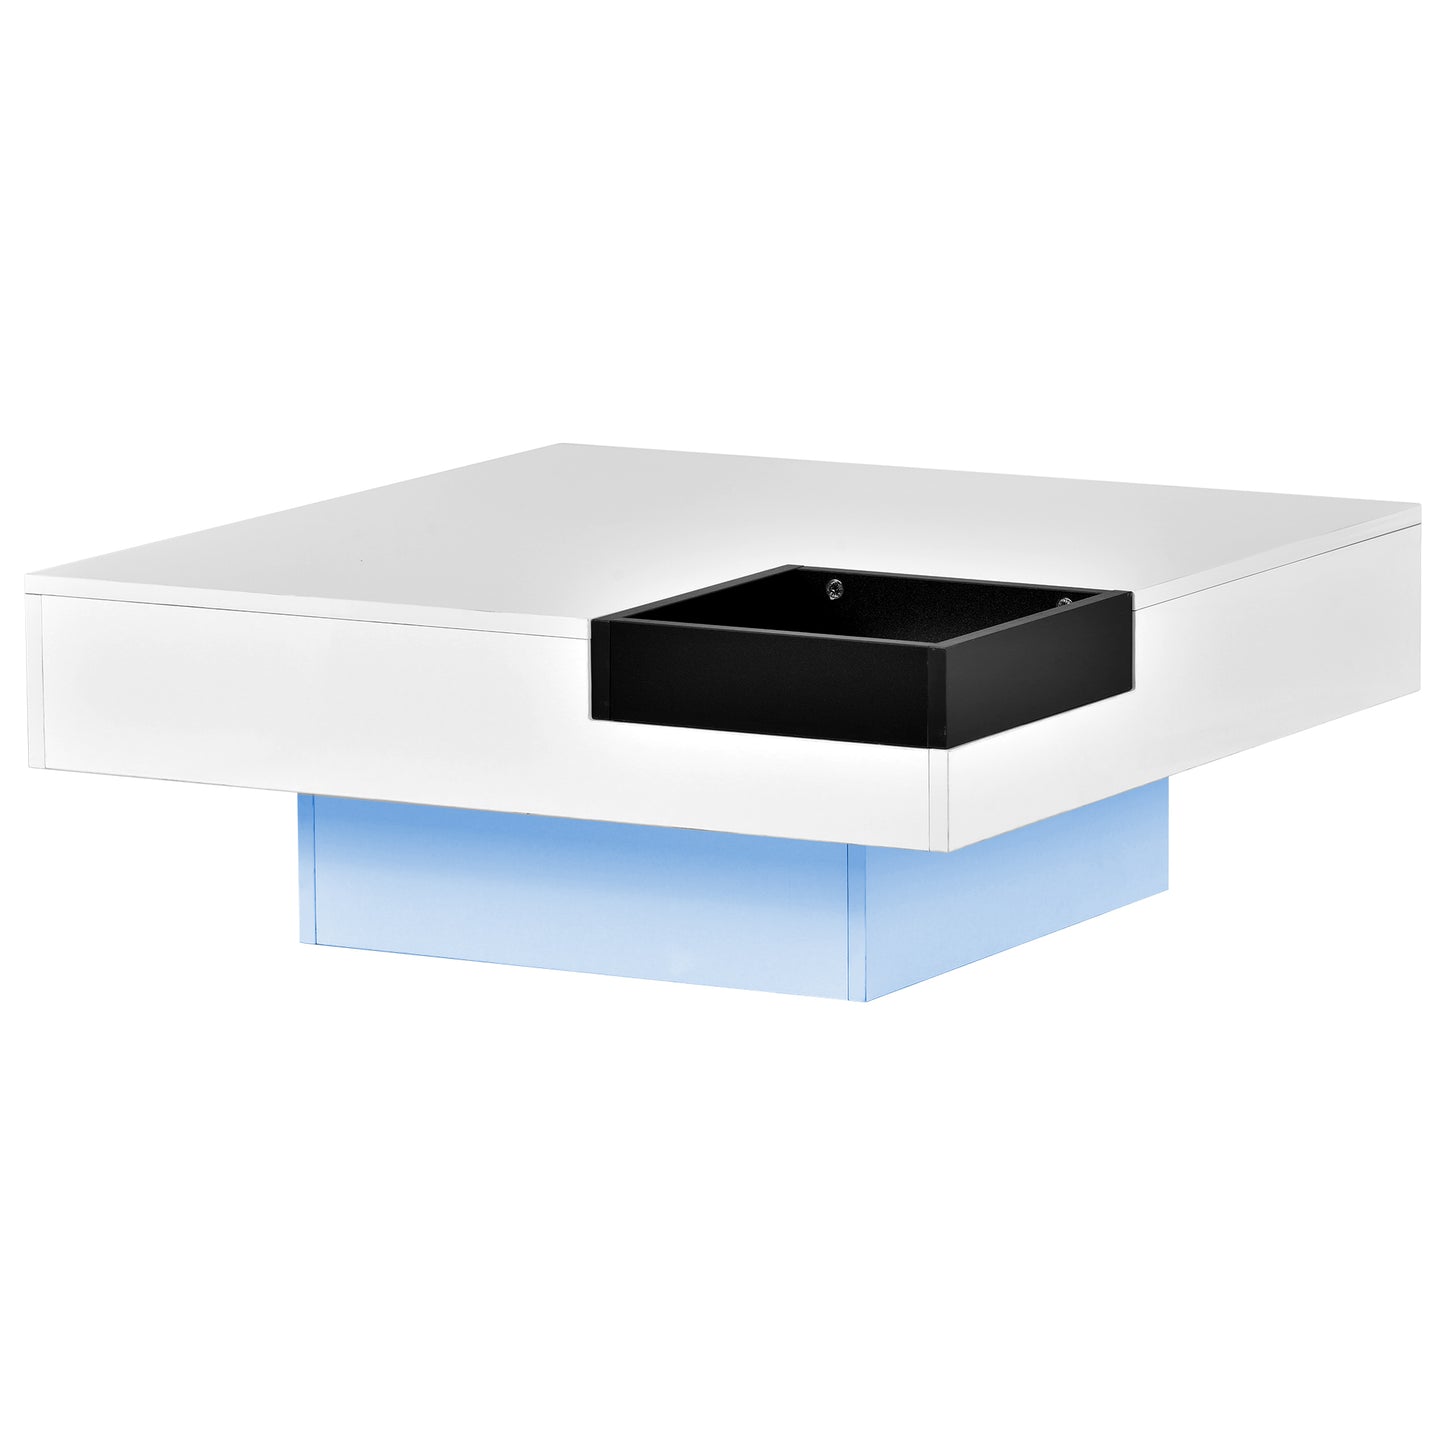 Chic Square Coffee Table with LED Lights and Detachable Tray